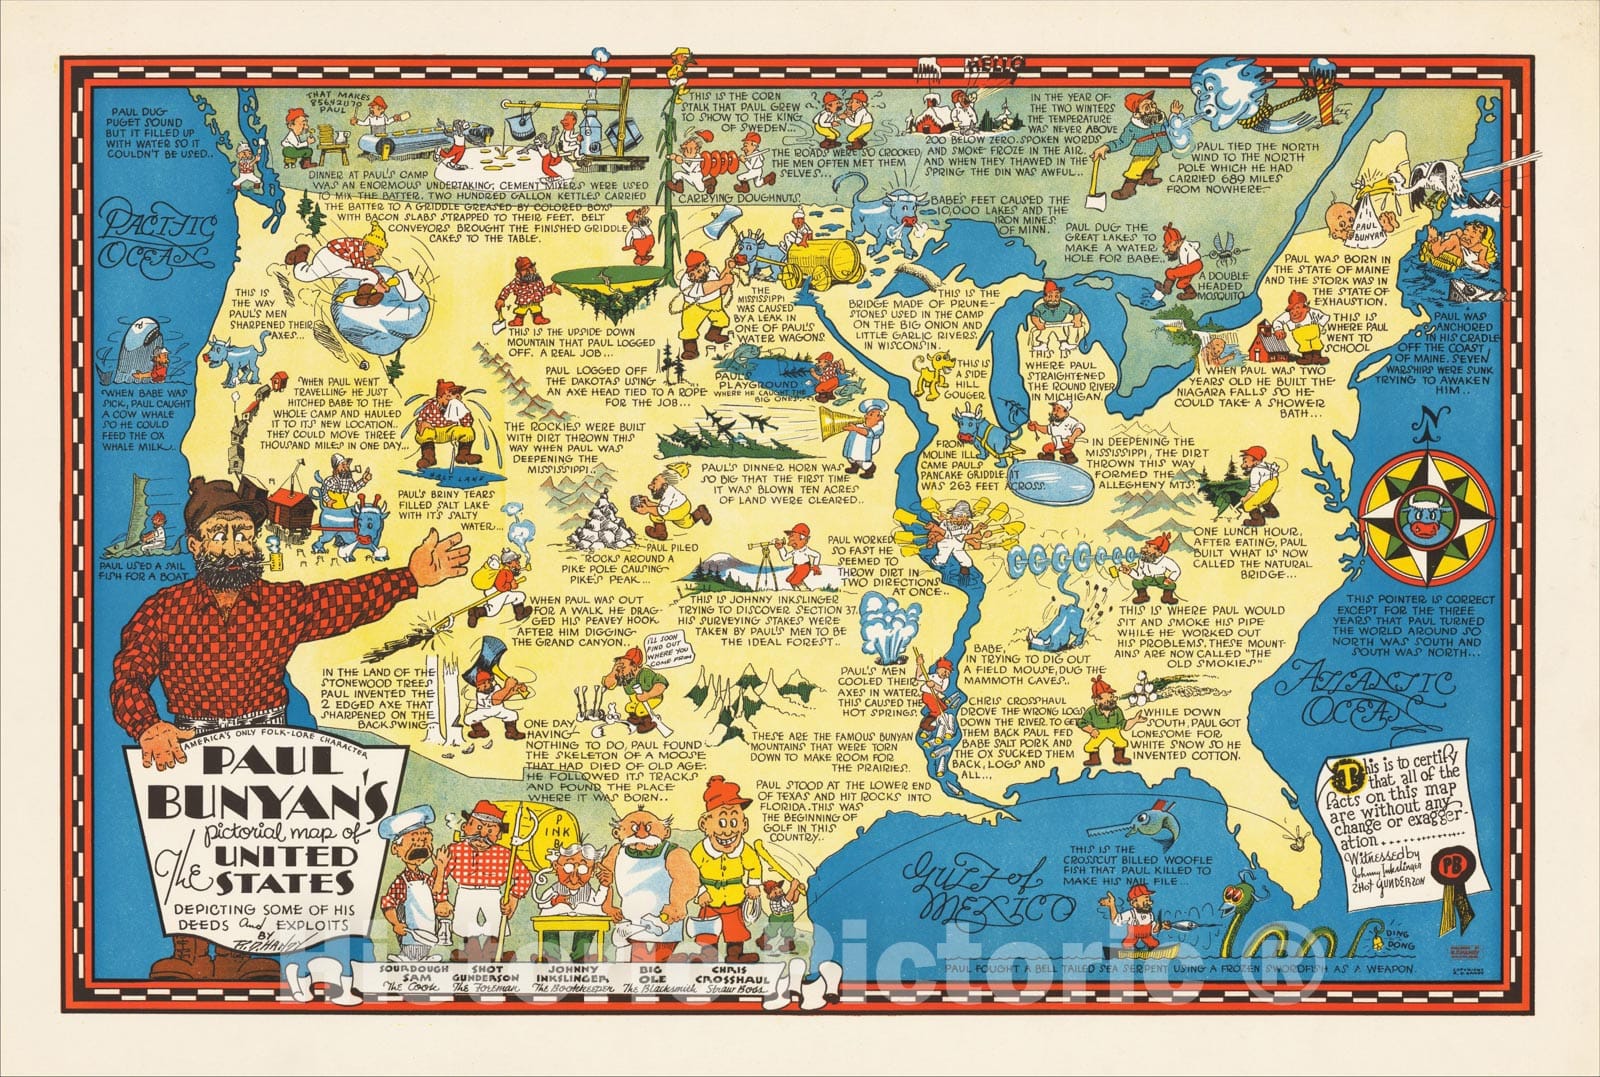 Historic Map : Paul Bunyan's pictorial map of the United States Depicting Some of his Deeds and Exploits By R. D. Handy, 1935, R. D. Handy, Vintage Wall Art